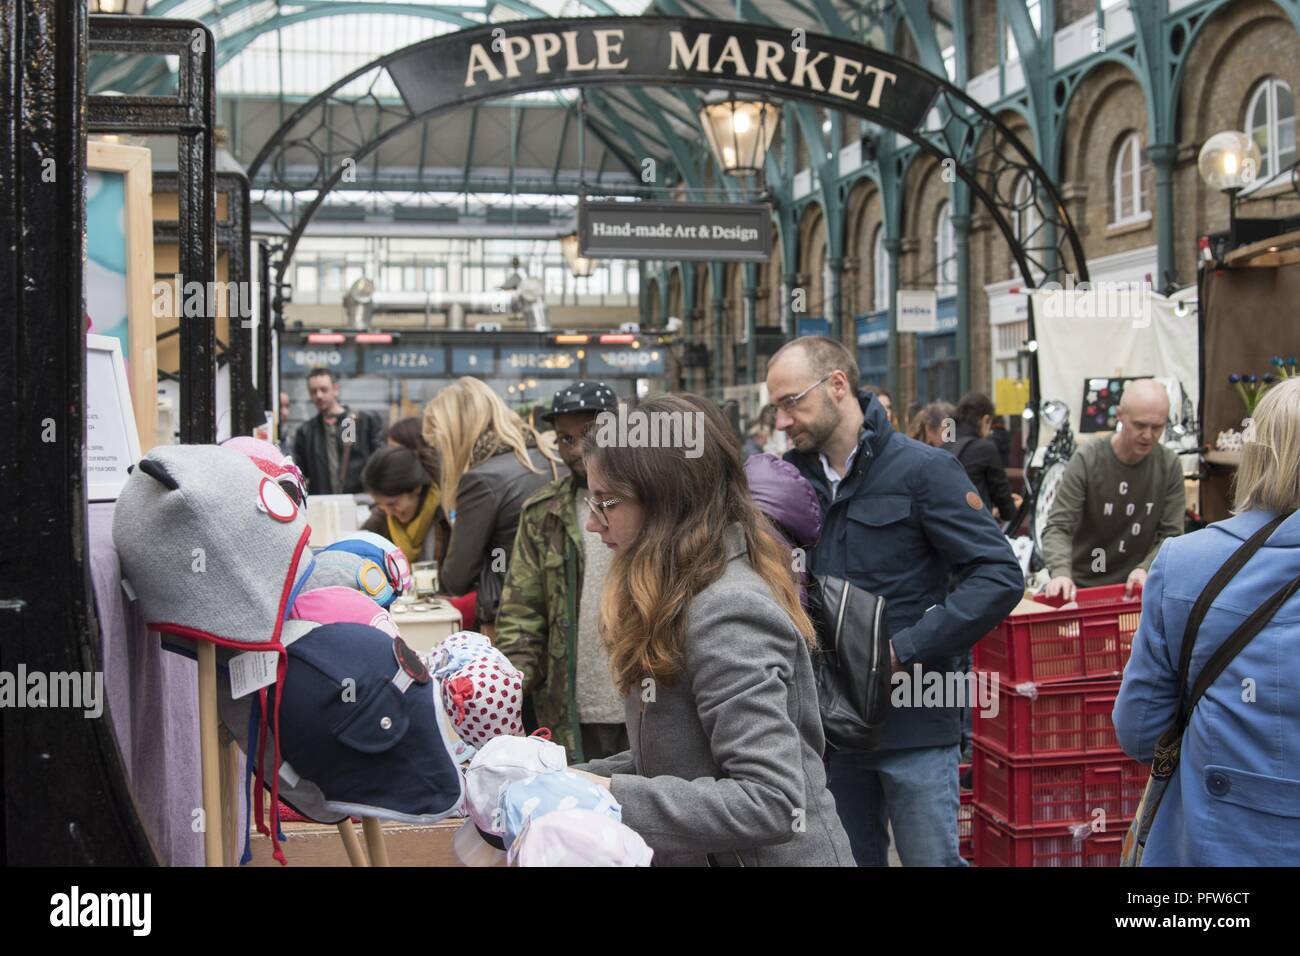 Crowded Apple Market in the New Covent Garden Market, Nine Elms, London, United Kingdom, October 29, 2017. () Stock Photo